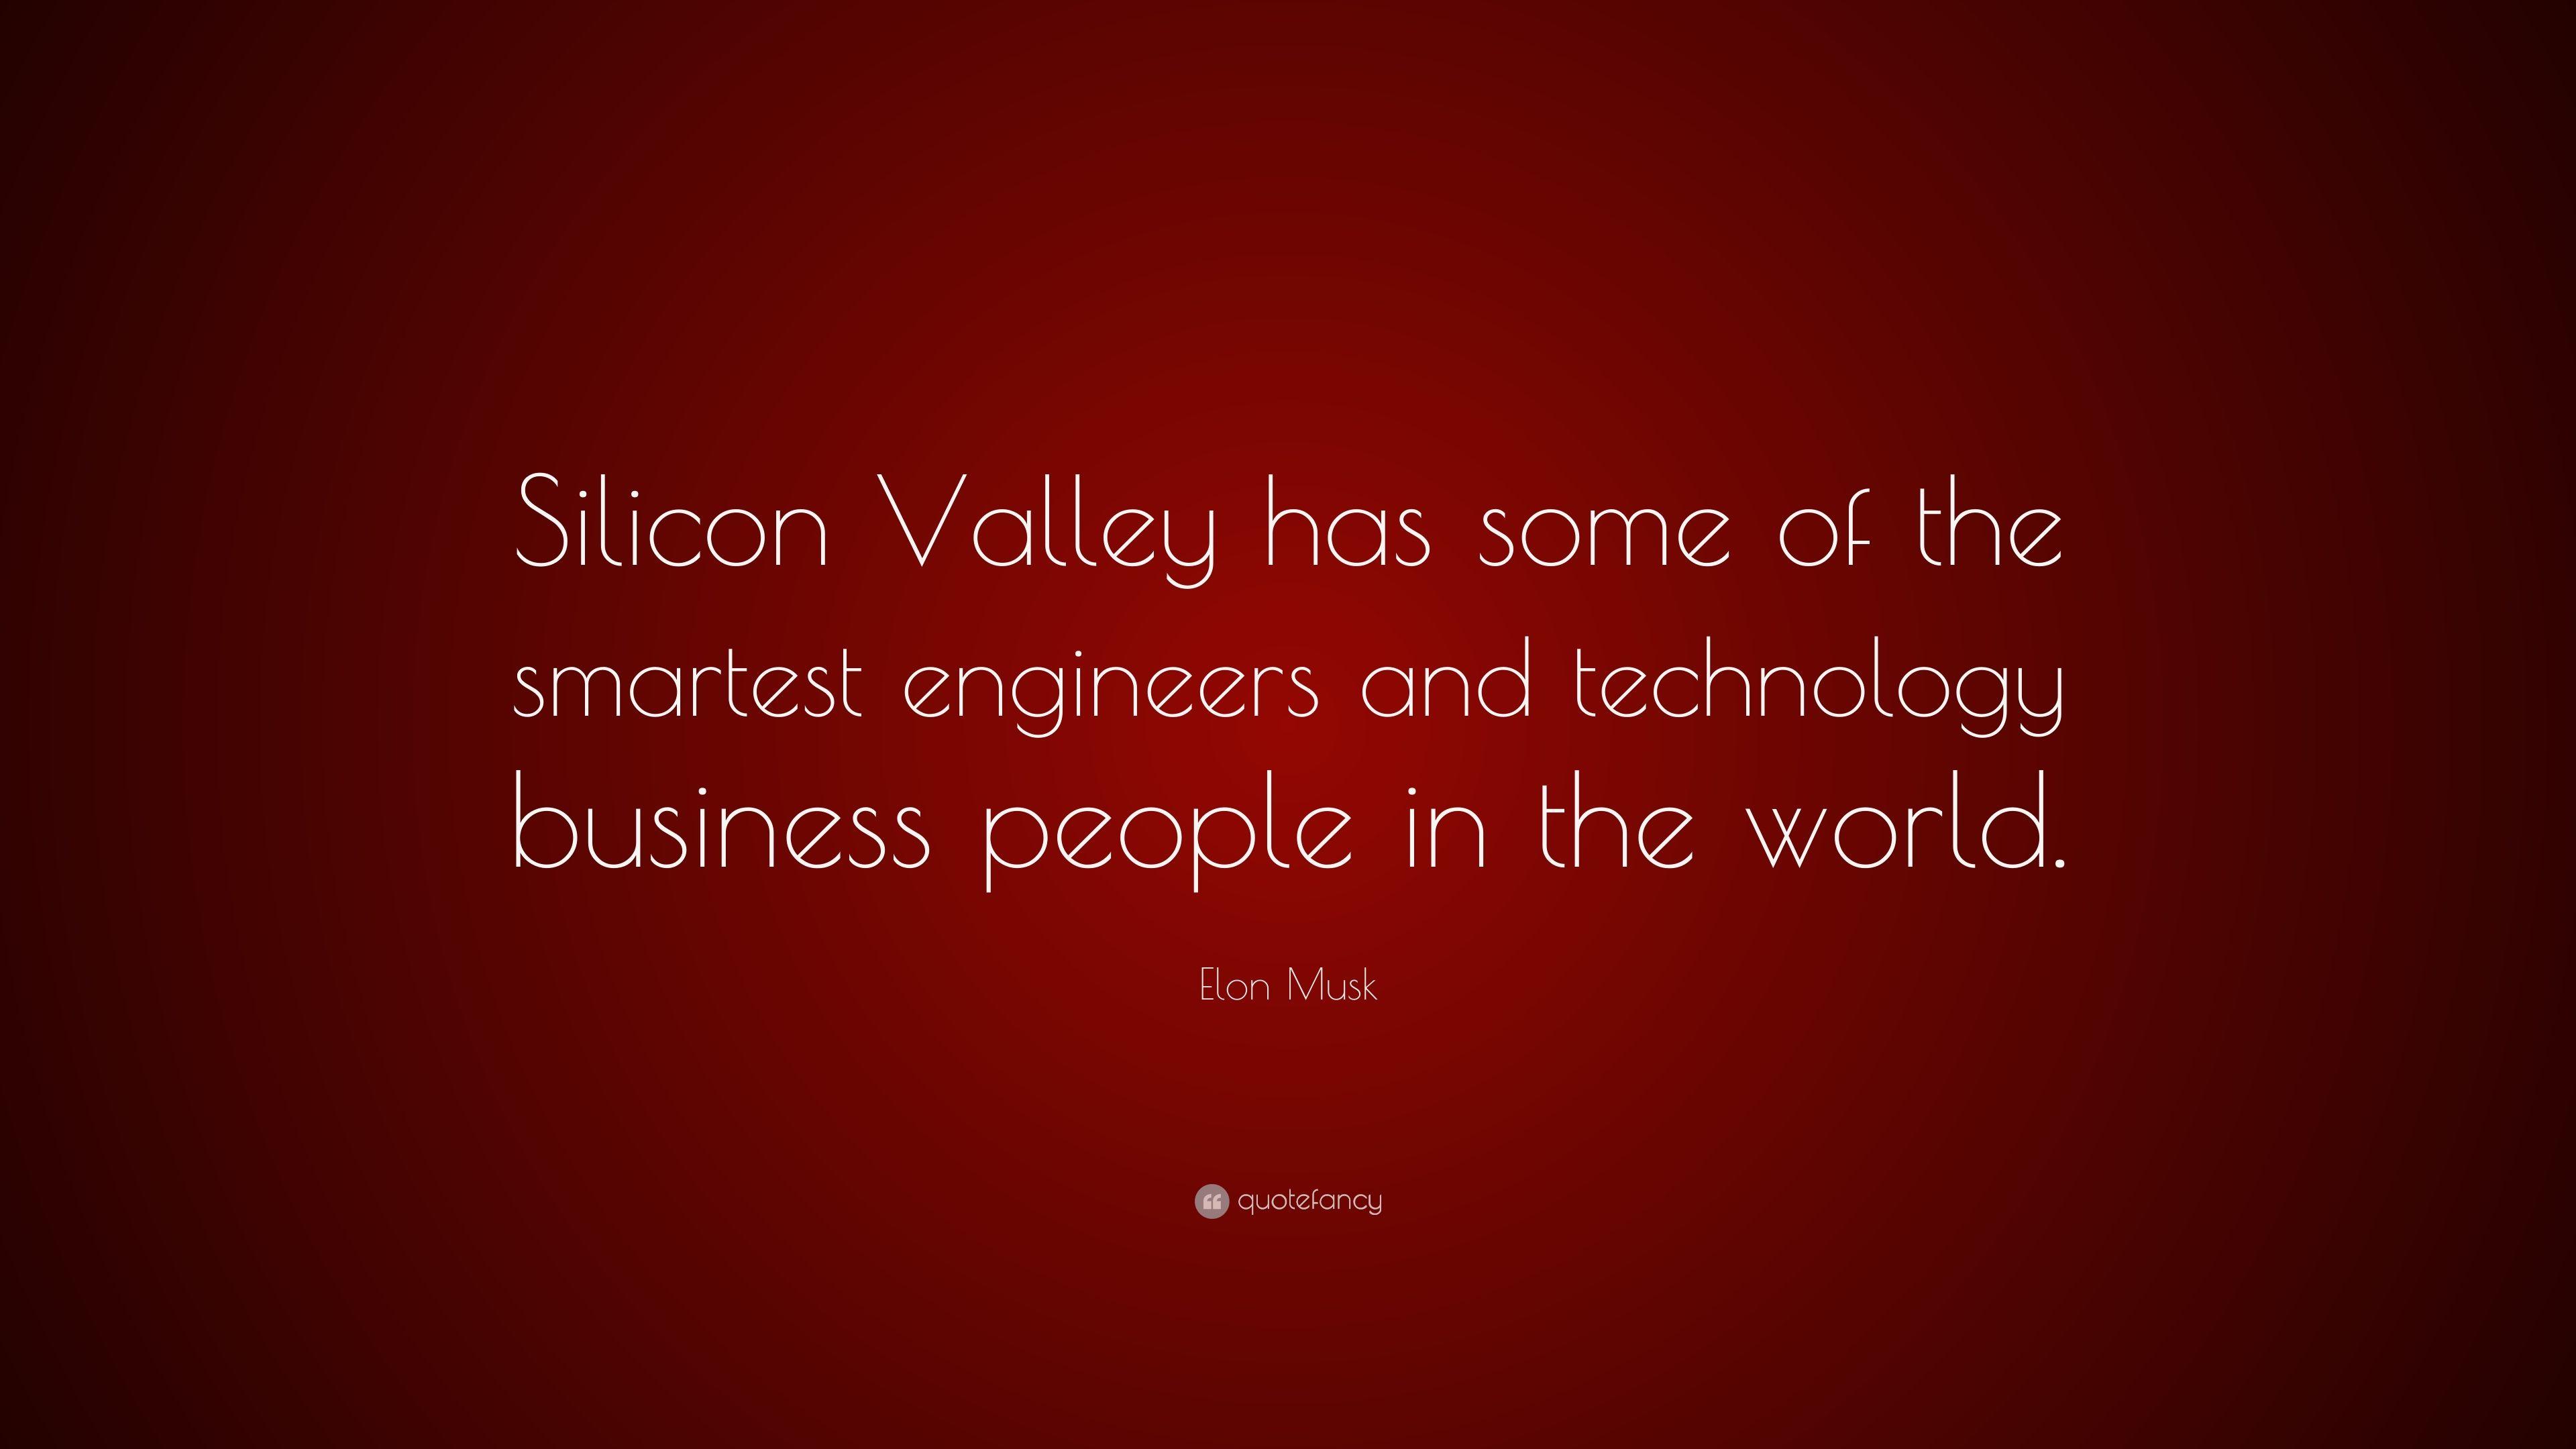 Elon Musk Quote: “Silicon Valley has some of the smartest